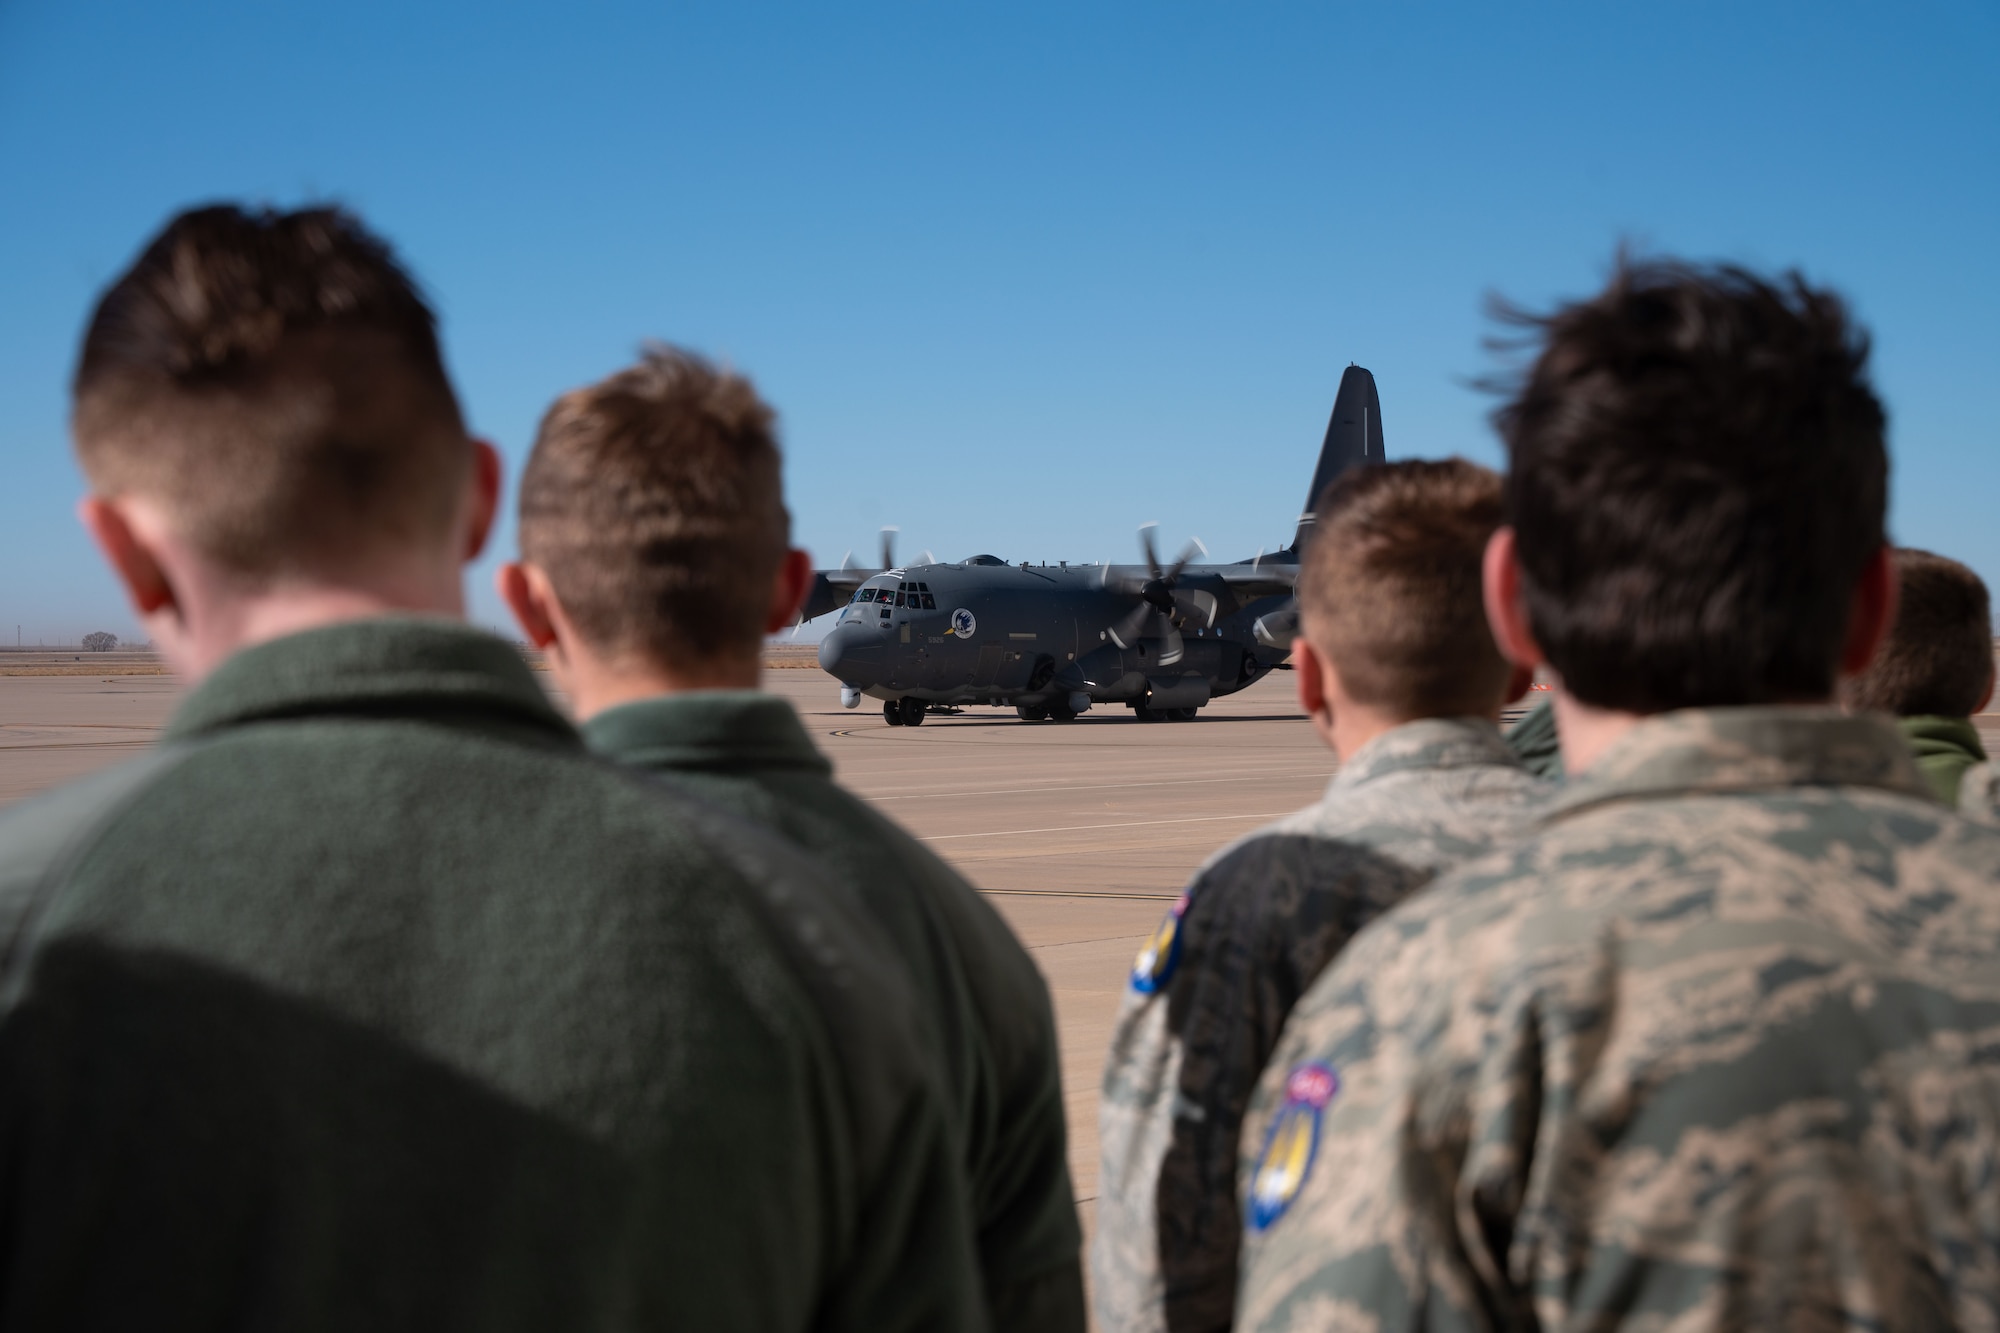 A group of young adults in military uniform stand outside while watching a military aircraft taxi.